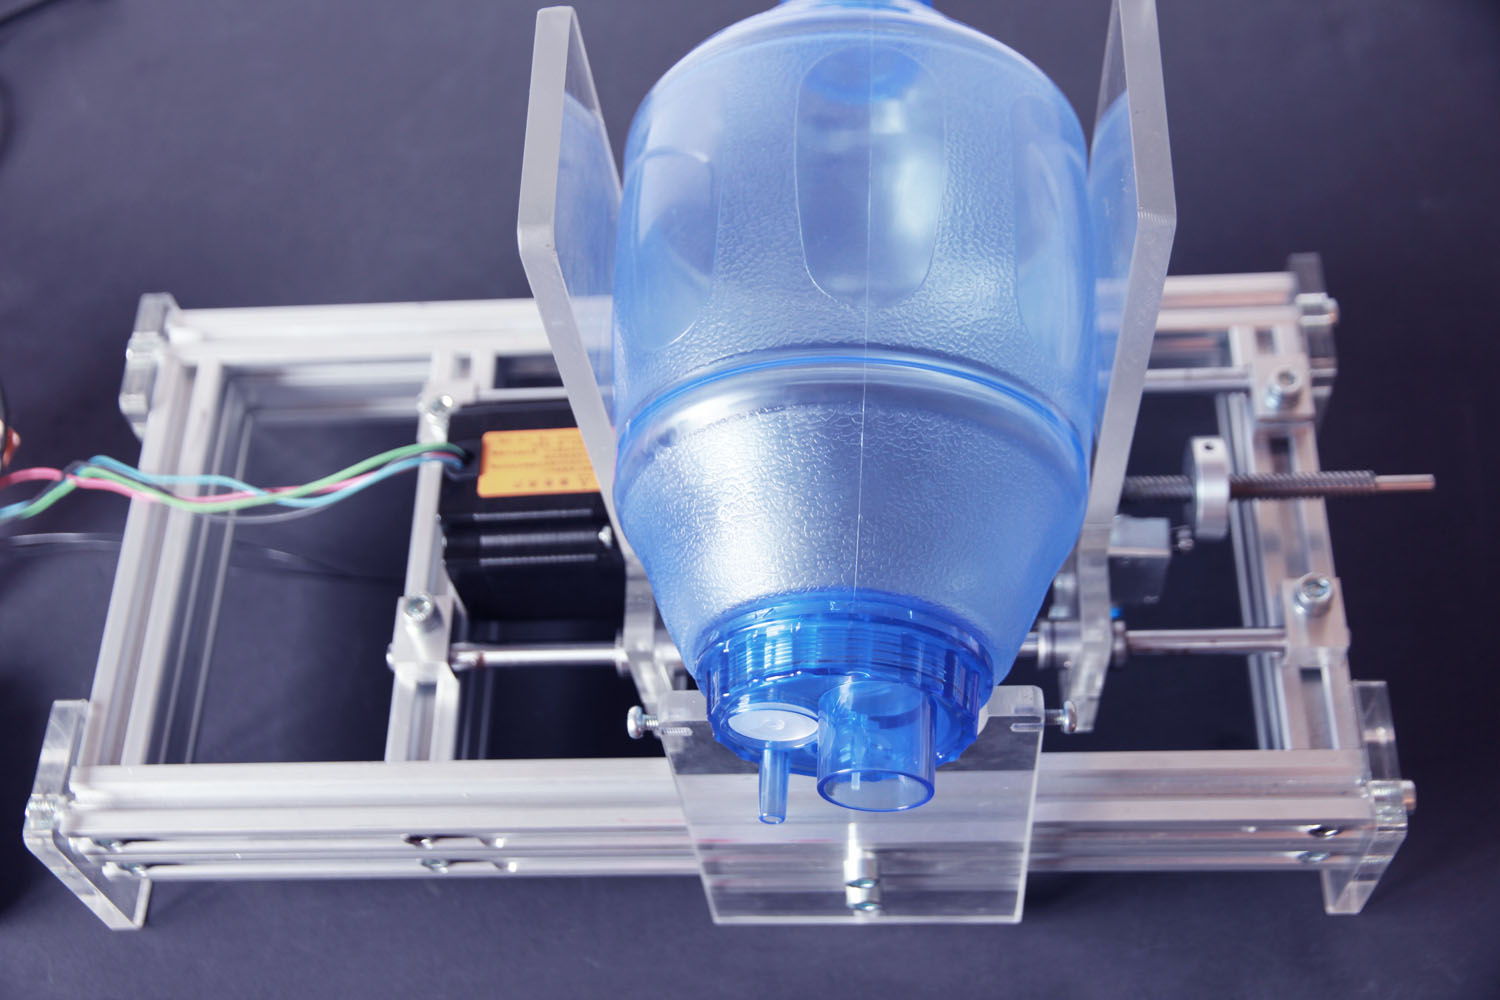 An open-source ventilator for lungs. A robotized the Ambu breathing system. It saves lives.